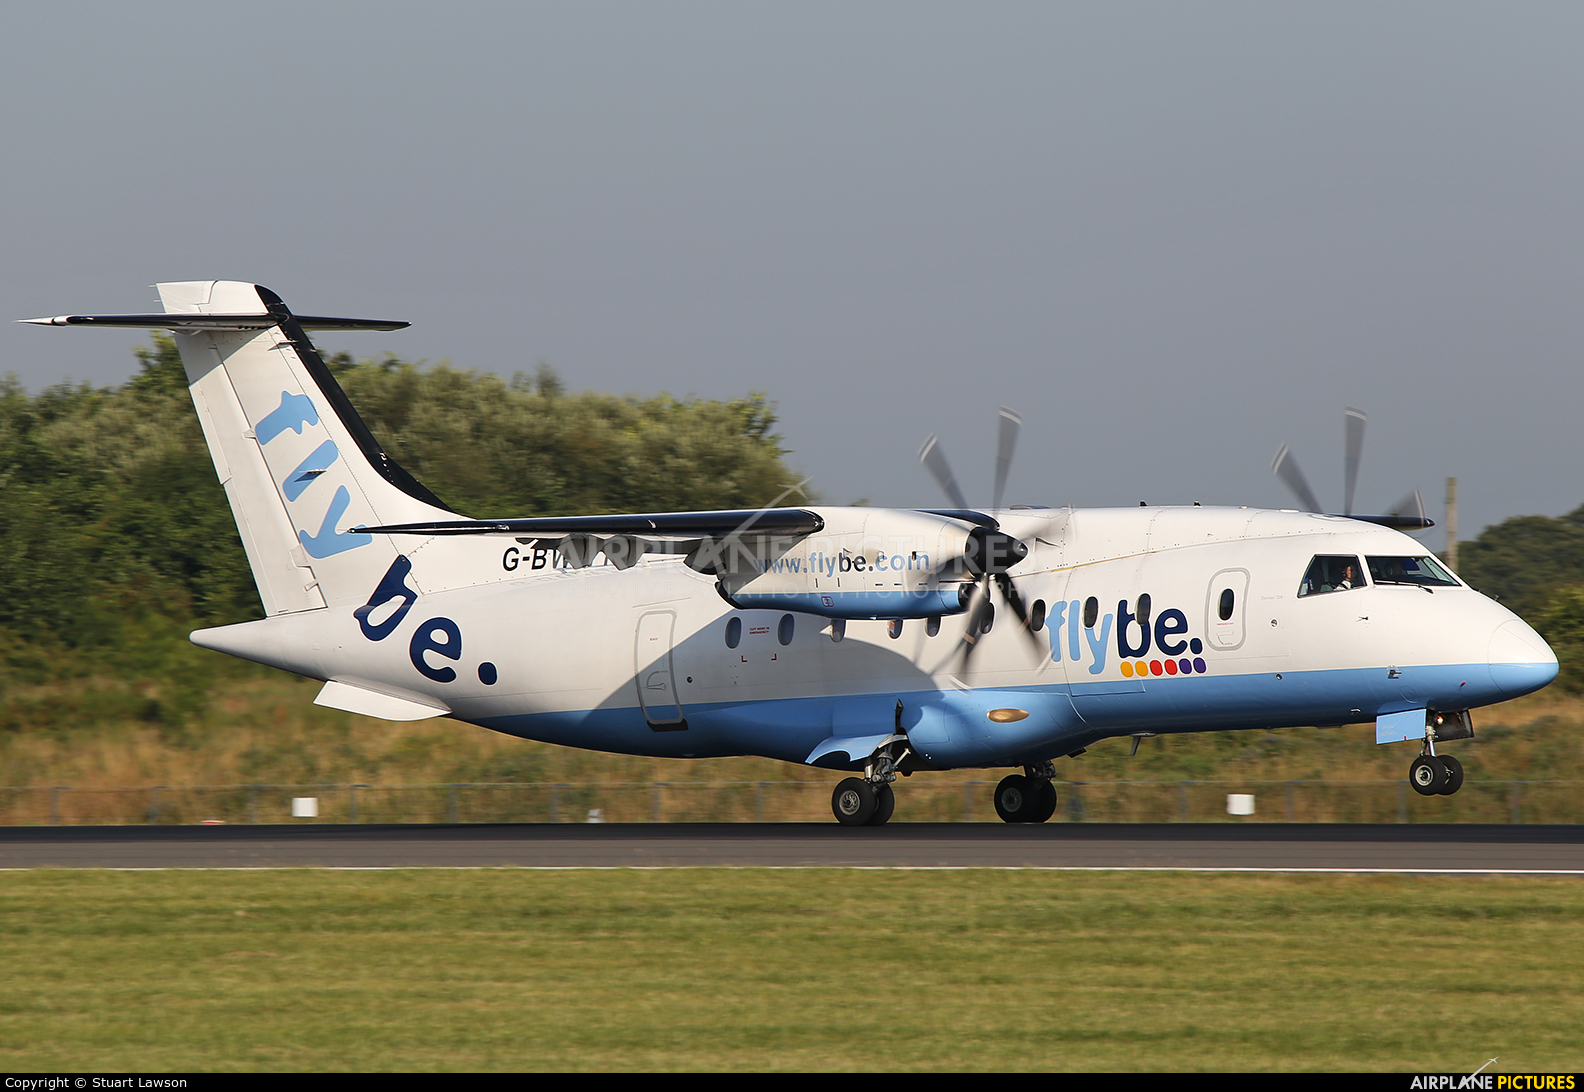 Flybe G-BWWT aircraft at Manchester